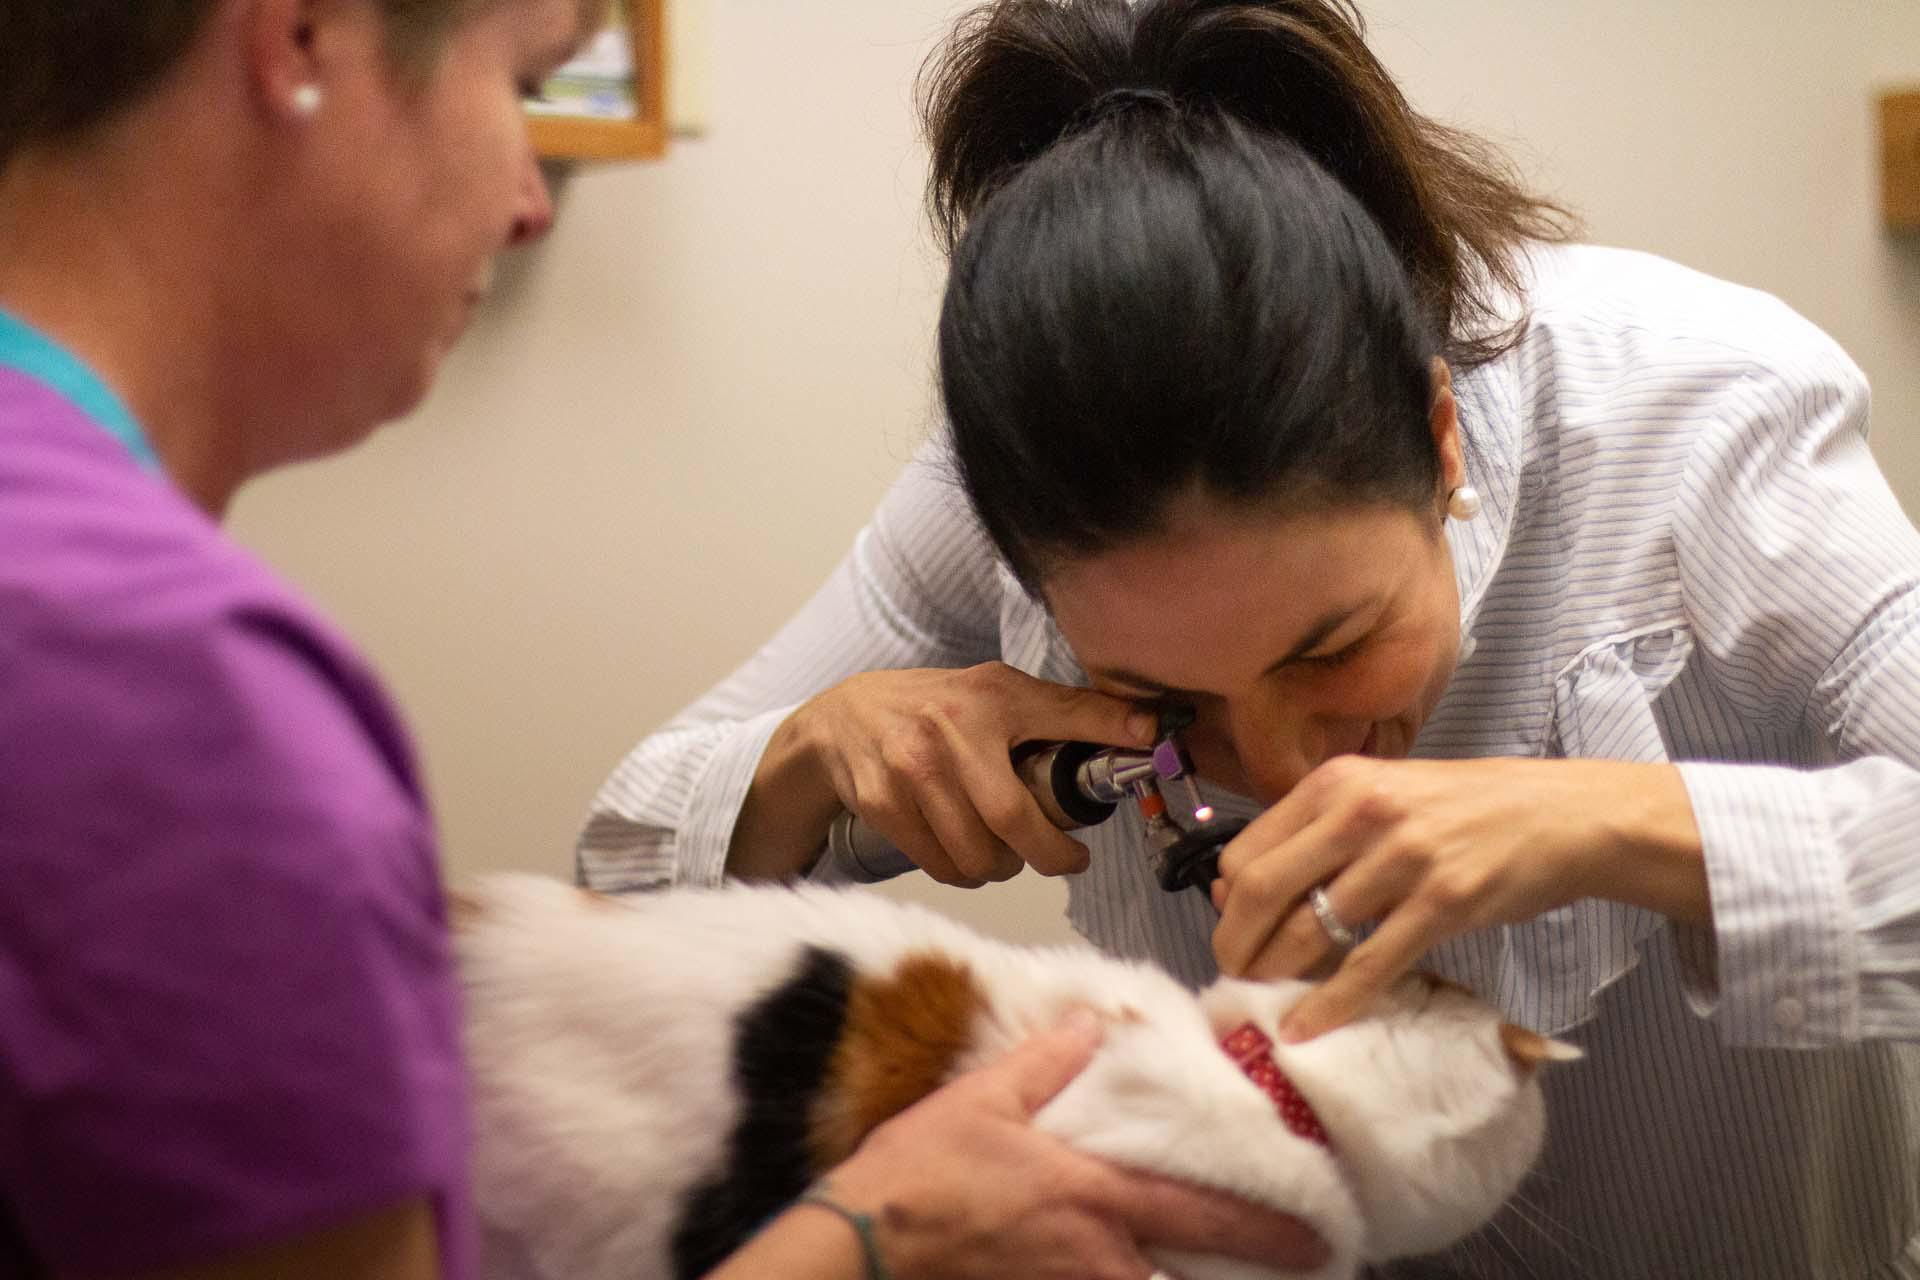 Dr. Smith proceeds with her feline exam by checking this kitty's ears for signs of infection.